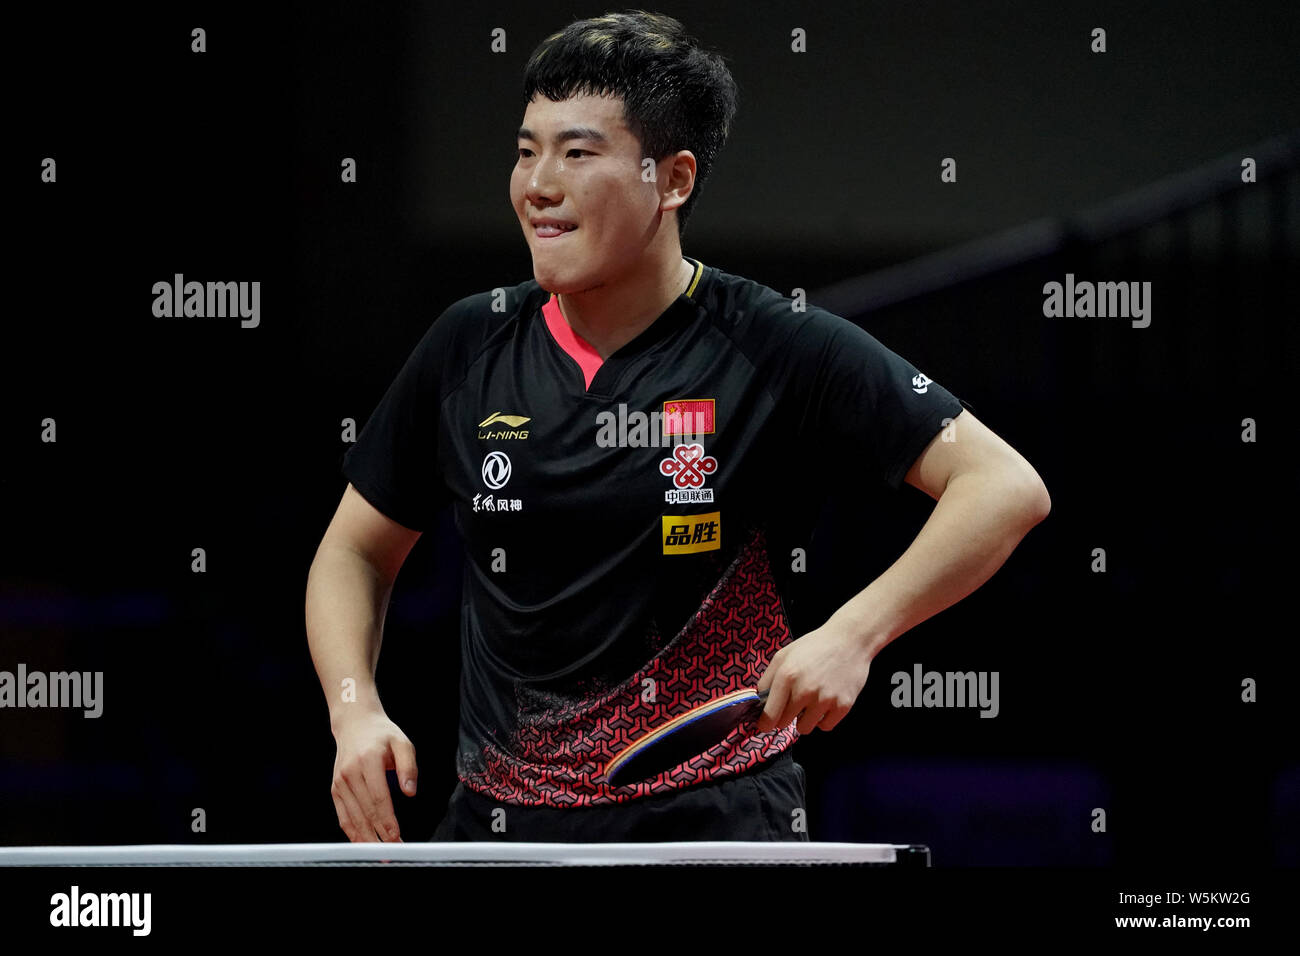 Liang Jingkun of China reacts as he competes against Panagiotis Gionis of Greece in their third round match of Men's Singles during the Liebherr 2019 Stock Photo